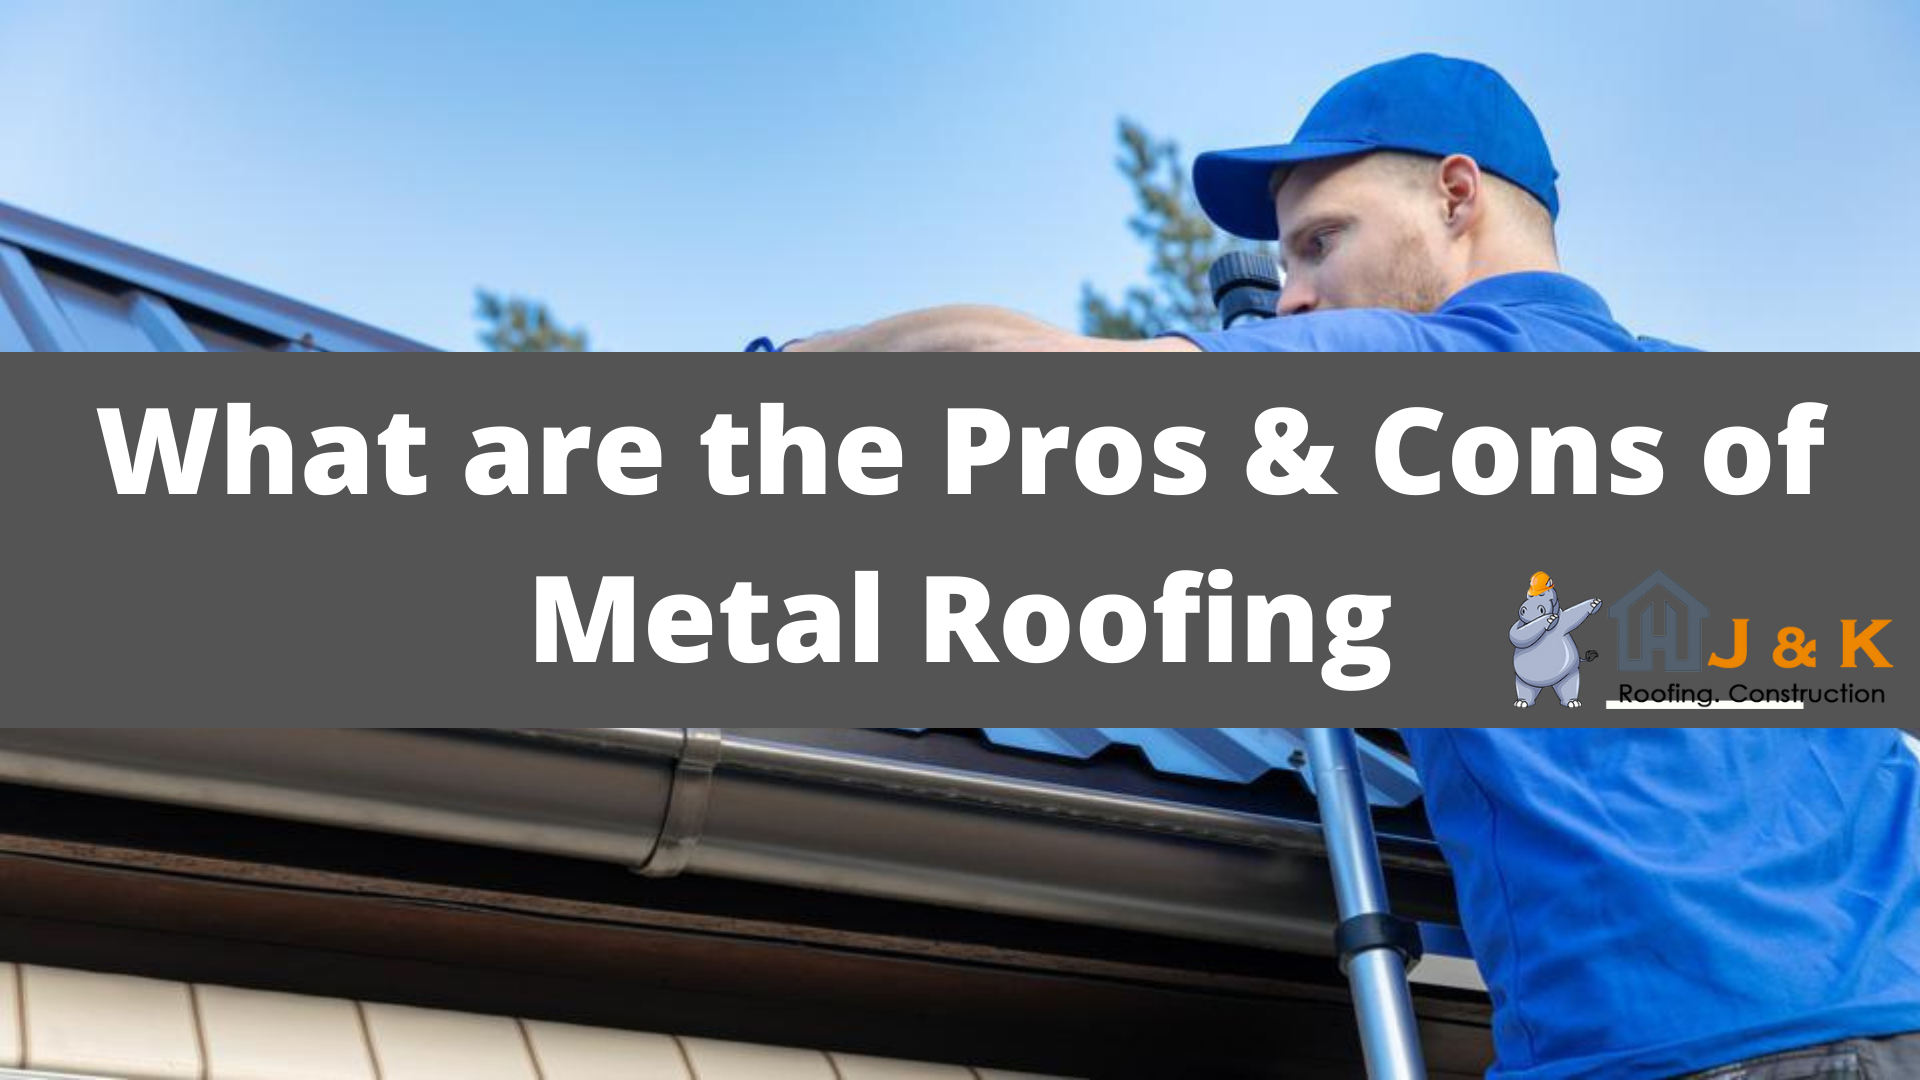 What are the Pros & Cons of Metal Roofing